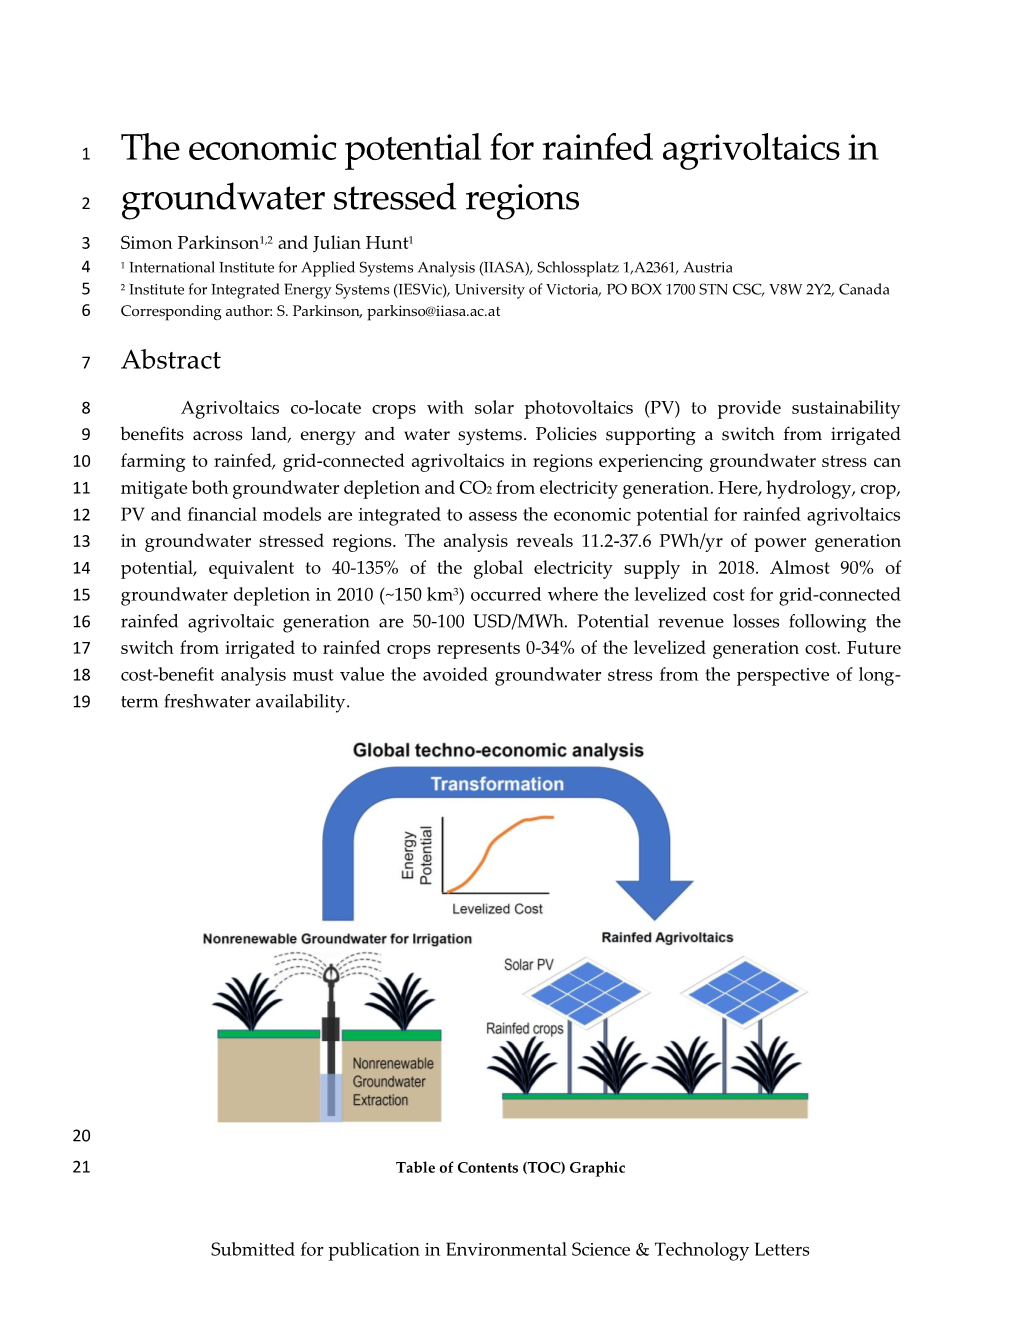 The Economic Potential for Rainfed Agrivoltaics in Groundwater Stressed Regions